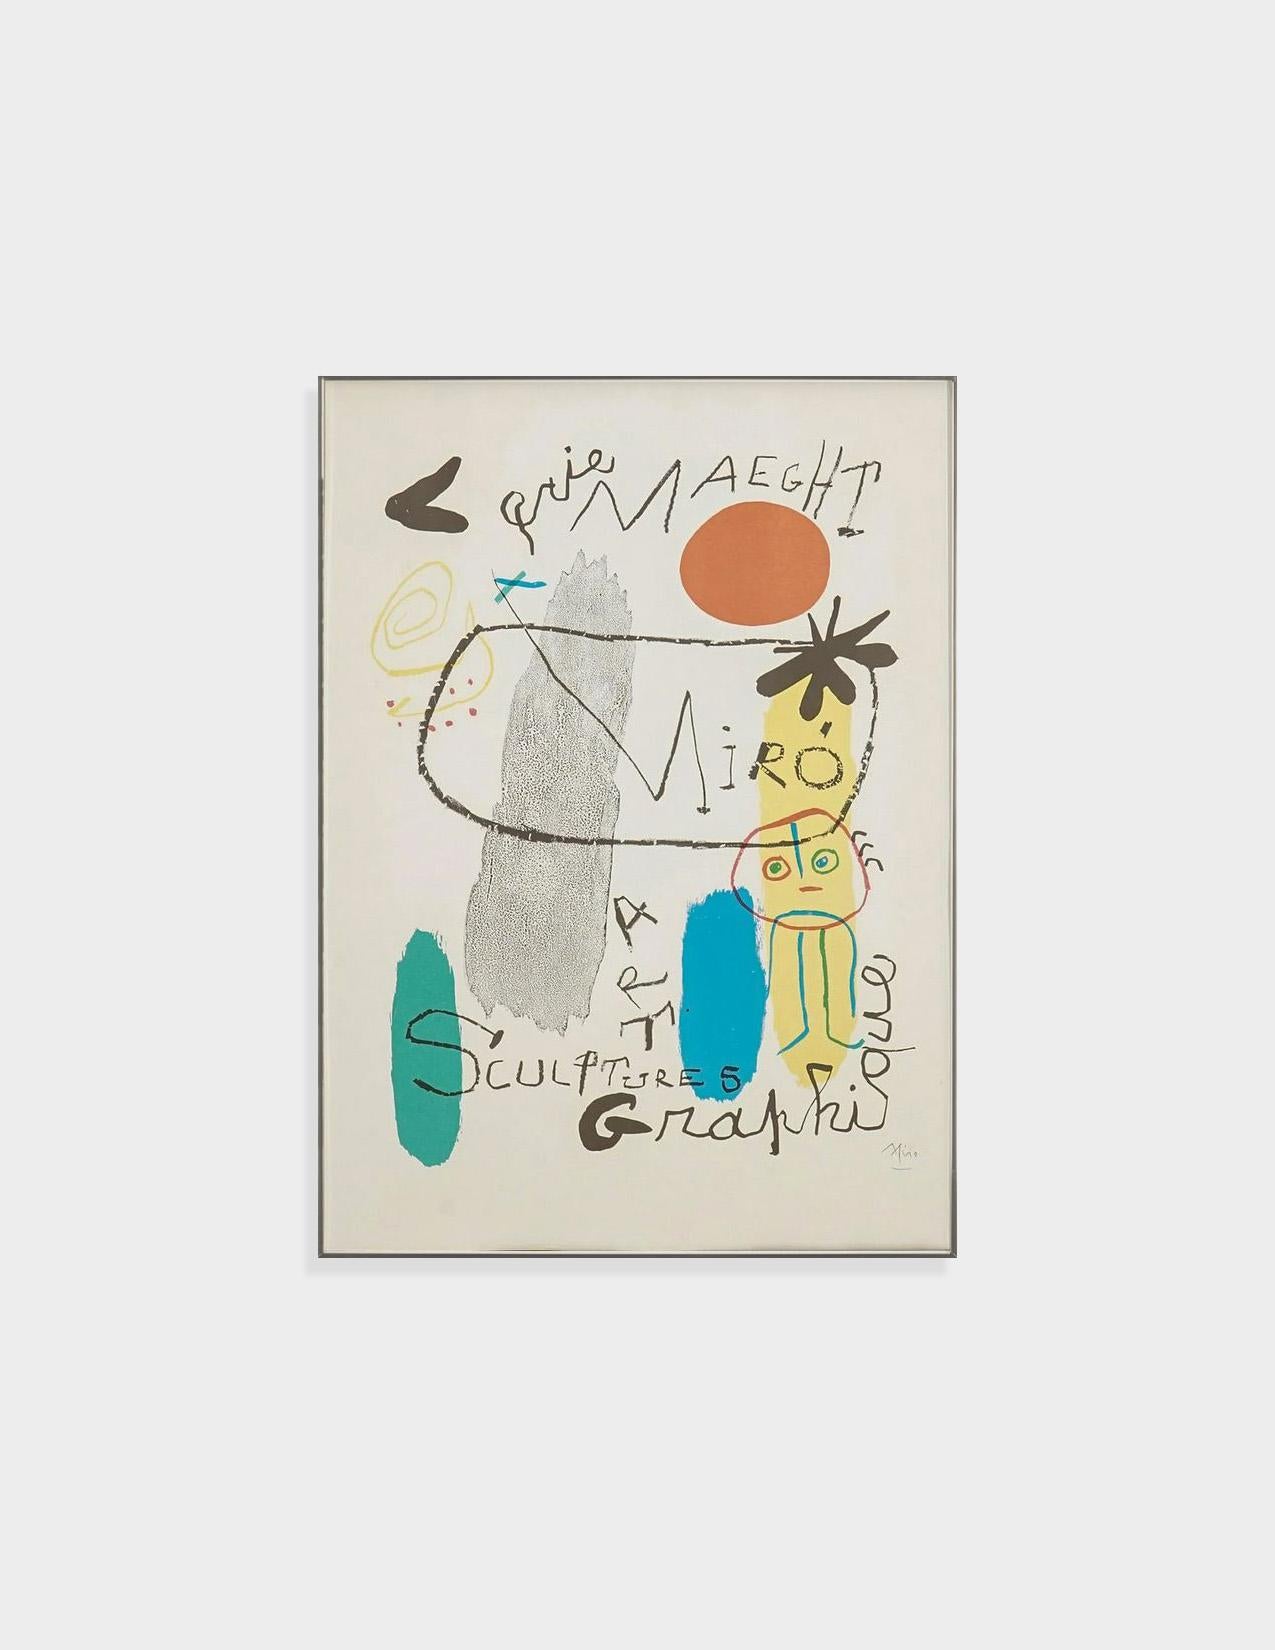 Framed Galeri Maeght Lithograph Exhibition Poster by Joan Miro. Joan Miro is a Catalan artist known for his abstract, expressive, and playful style. Signed in pencil to lower right. Frame included.